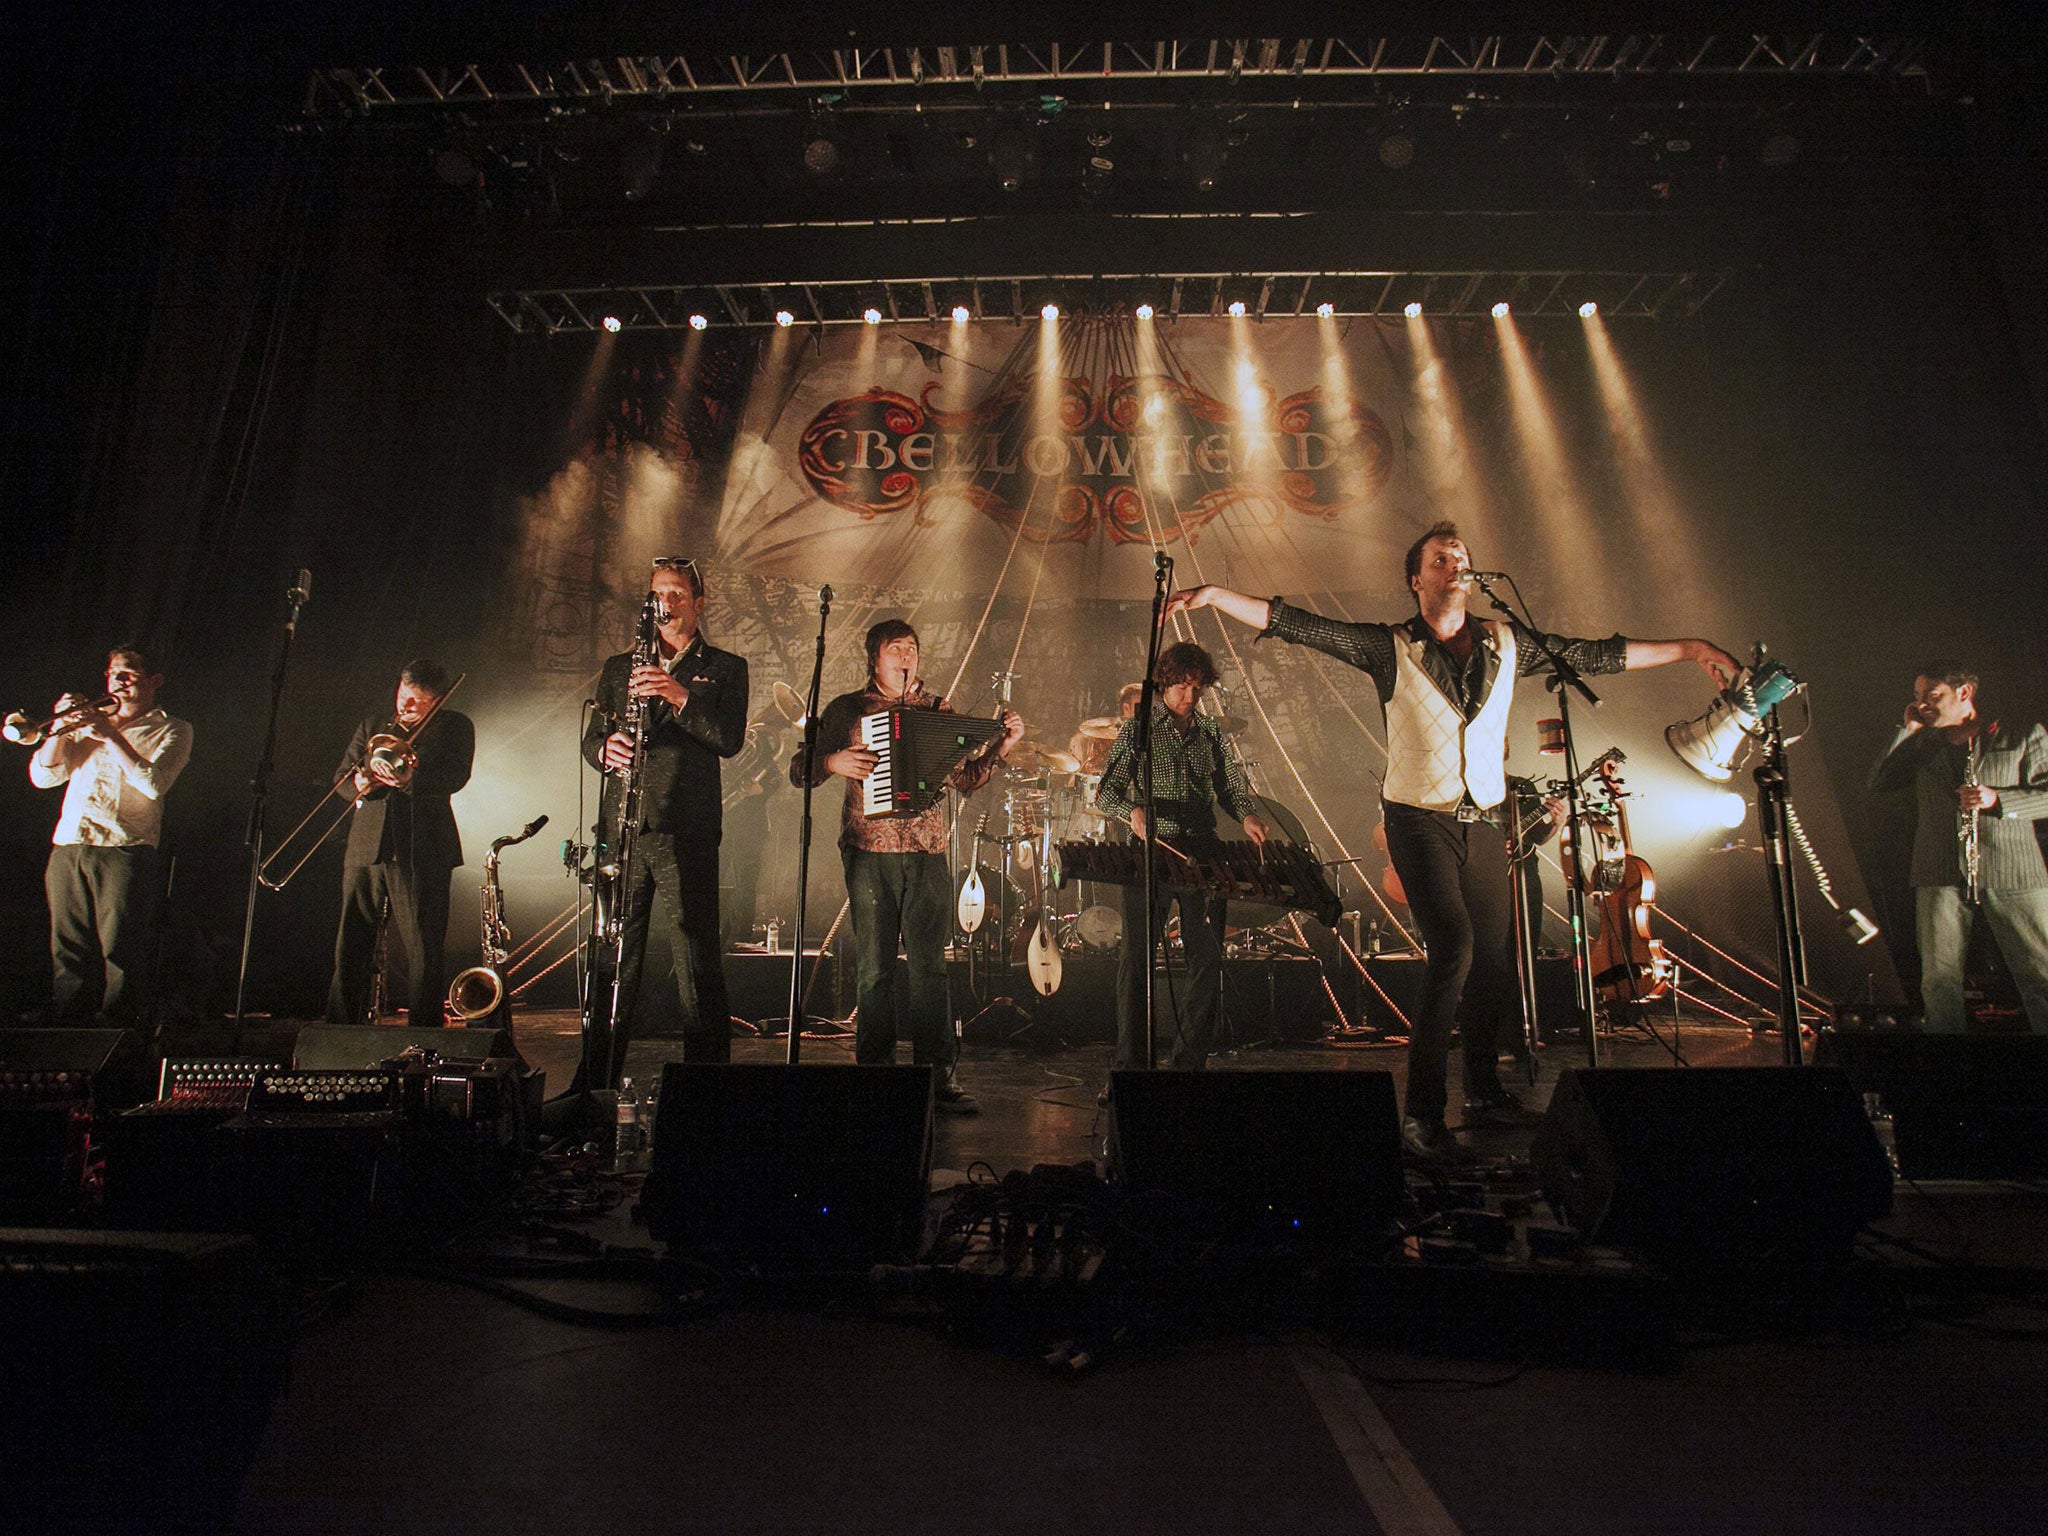 Bellowhead earned a reputation as one of the best live folk bands